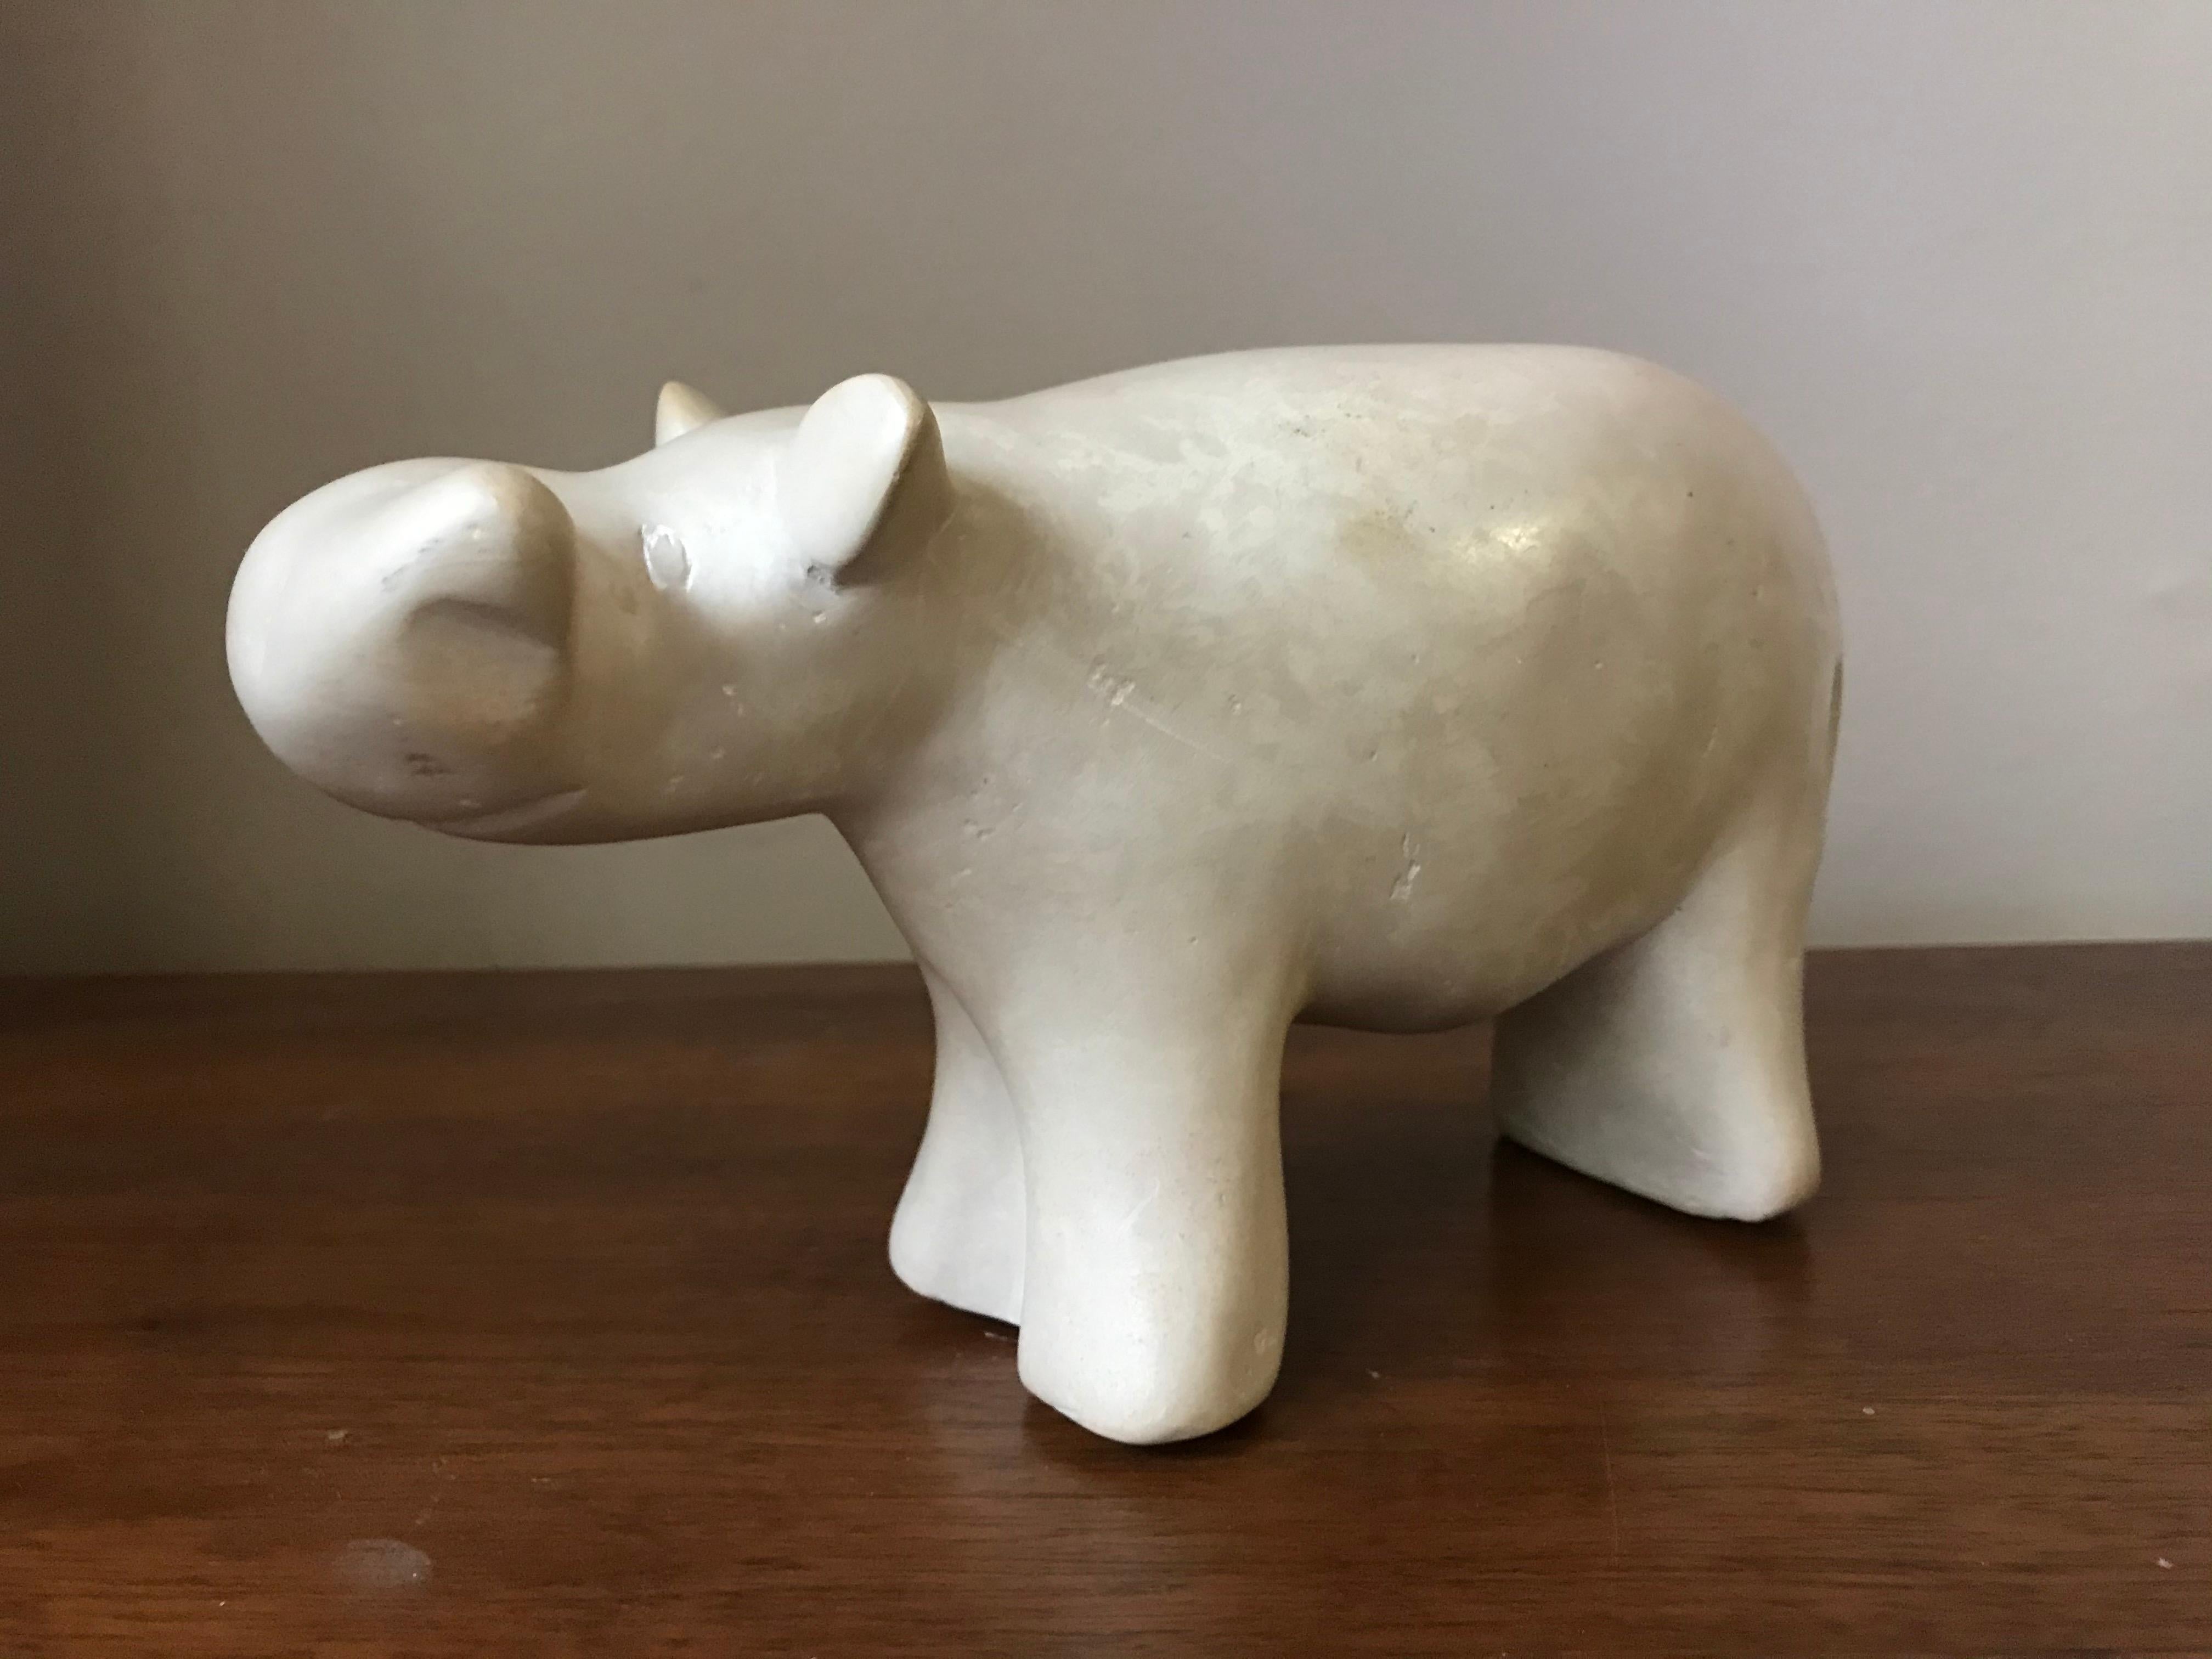 1950s-1960s modernist hippo sculpted from alabaster. Came from an artist's estate - everything was 1950s-1960s and most items were listed artists, besides her own work. This piece is unsigned. When set down, it slightly wobbles before coming to